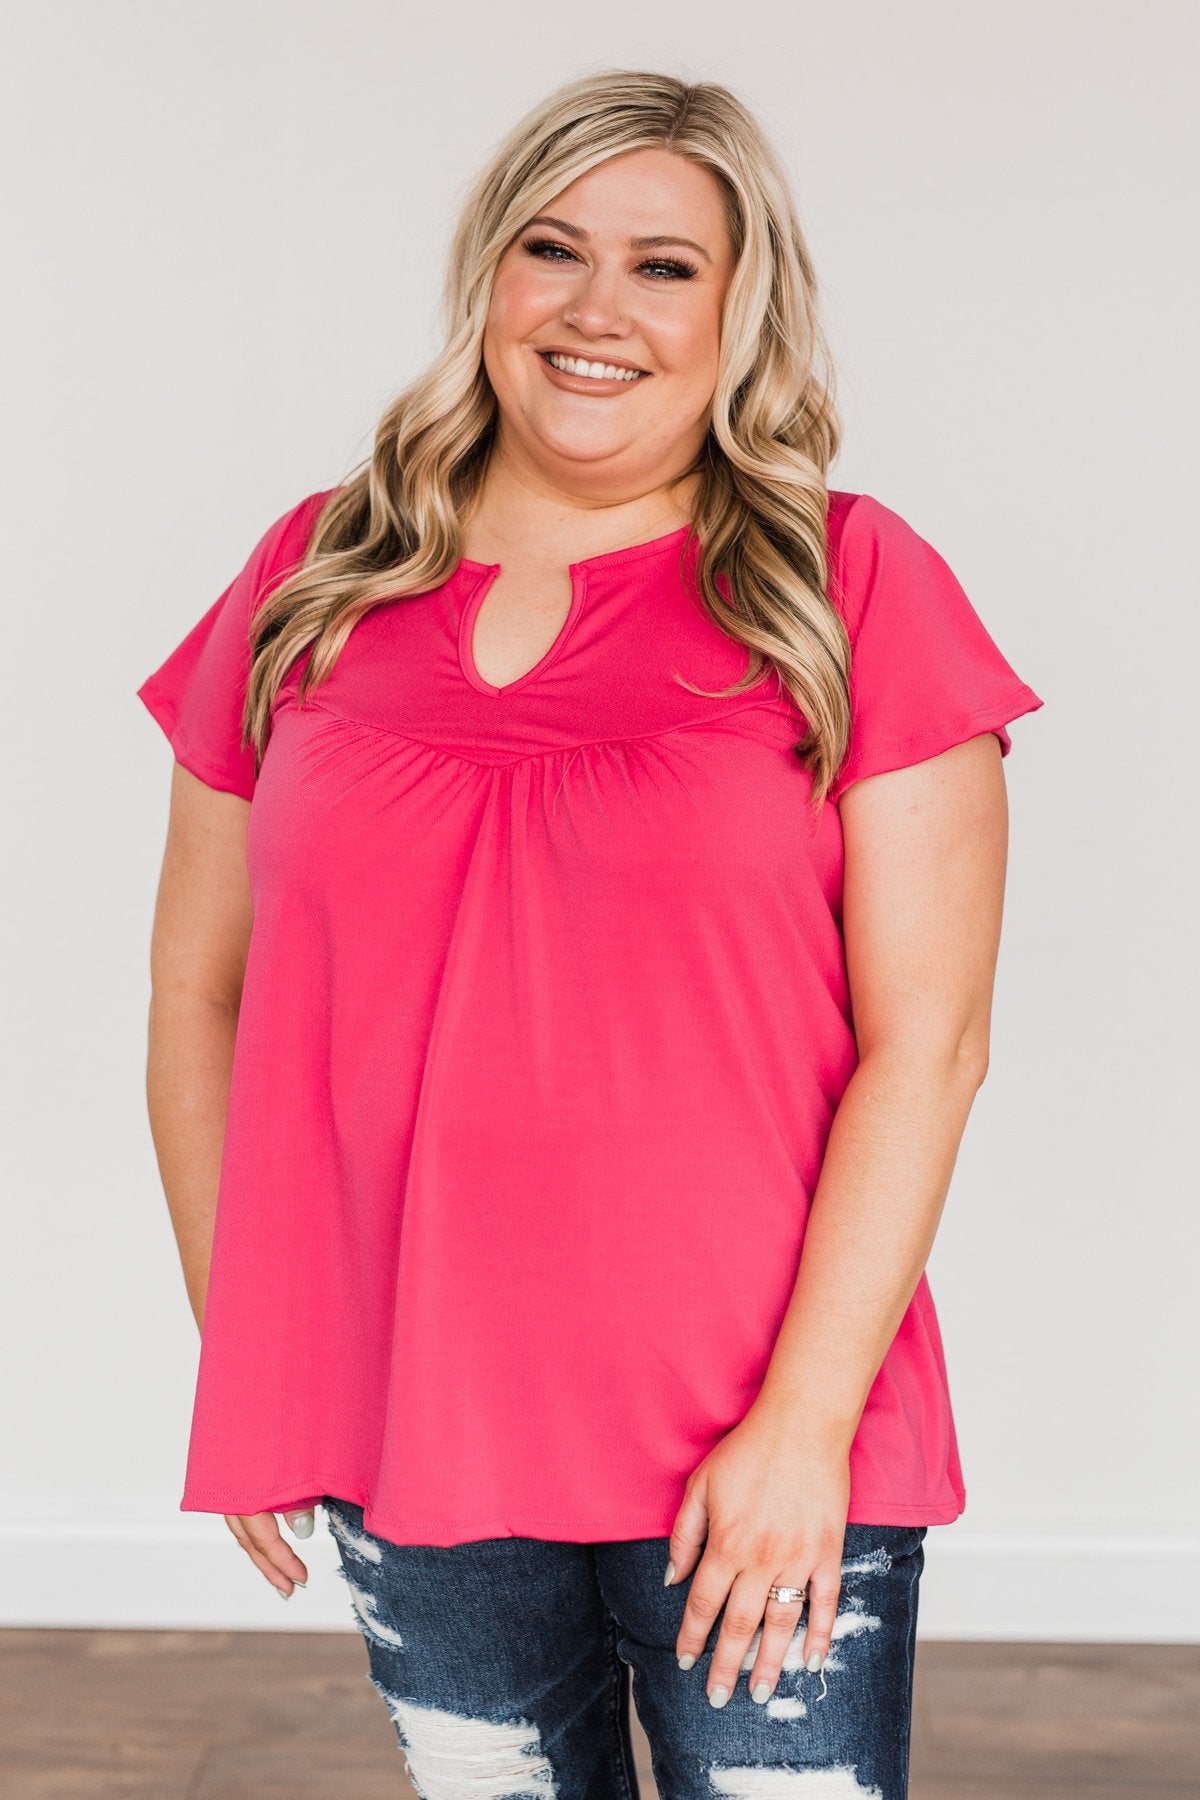 Strive For Excellence Notch Top- Fuchsia